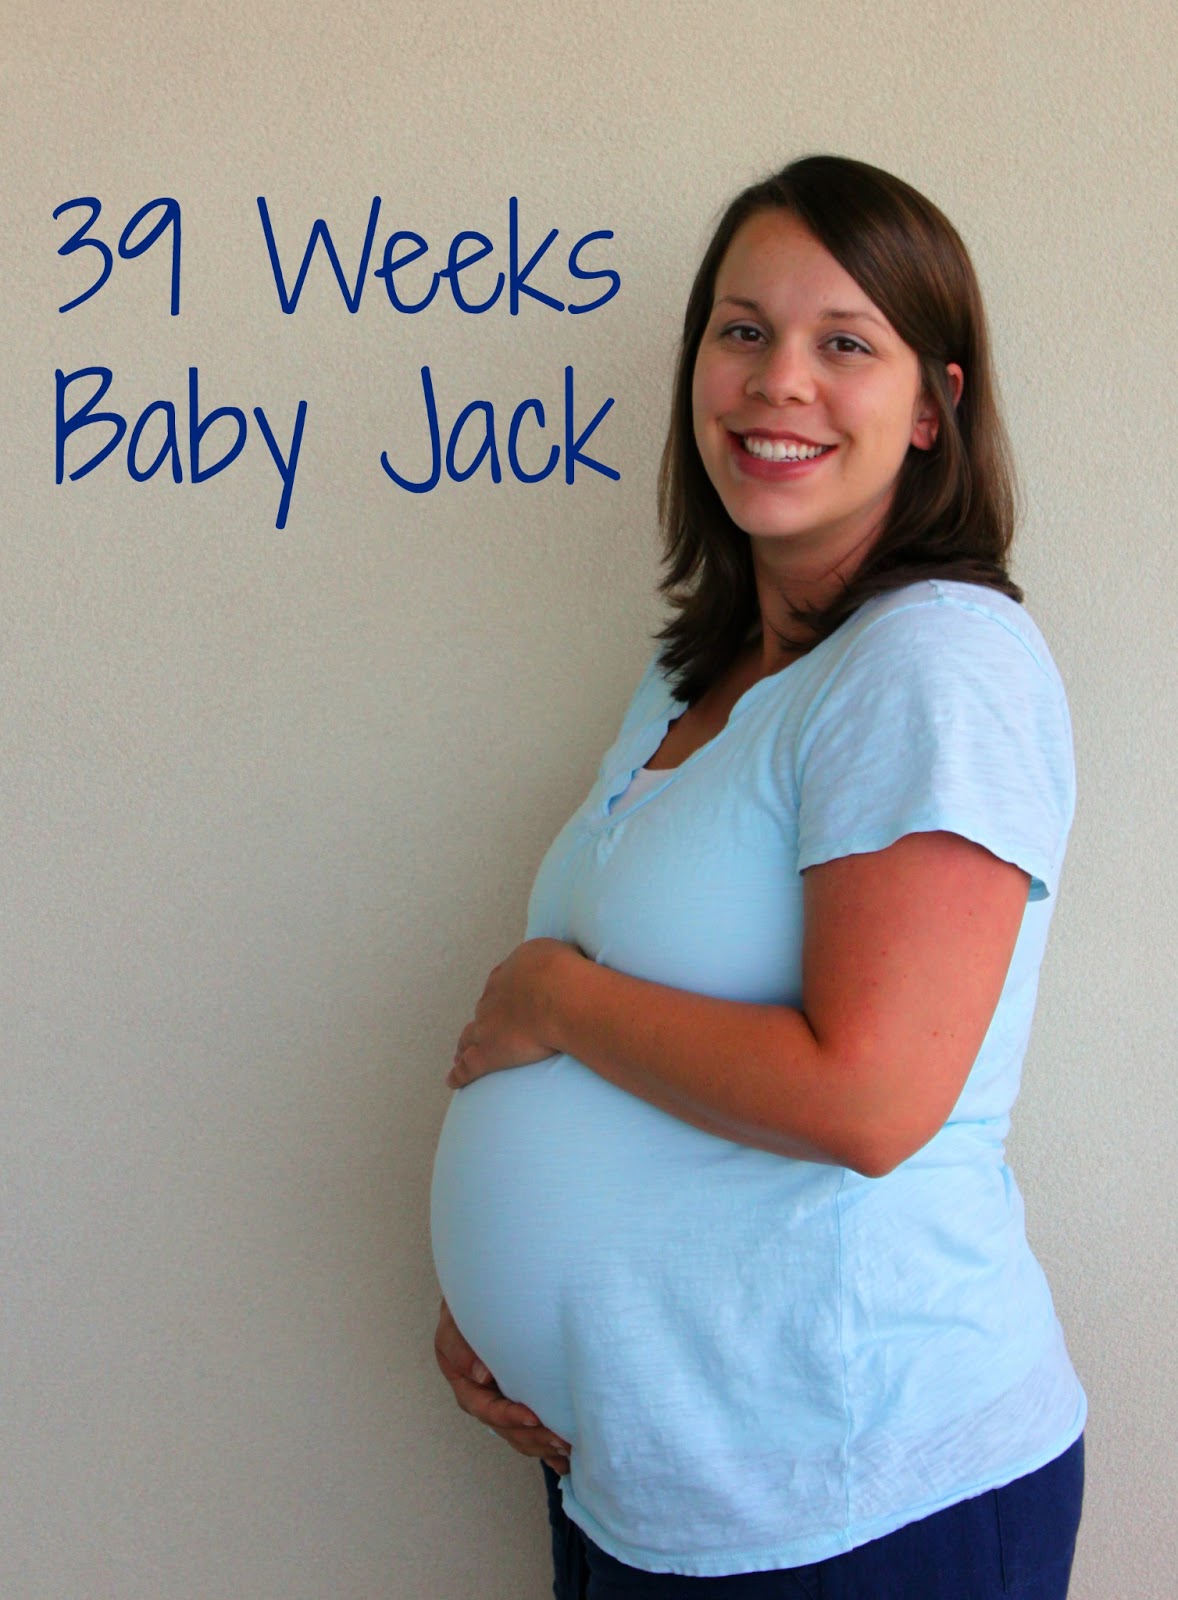 Baby Development During 39 Weeks: What to Expect